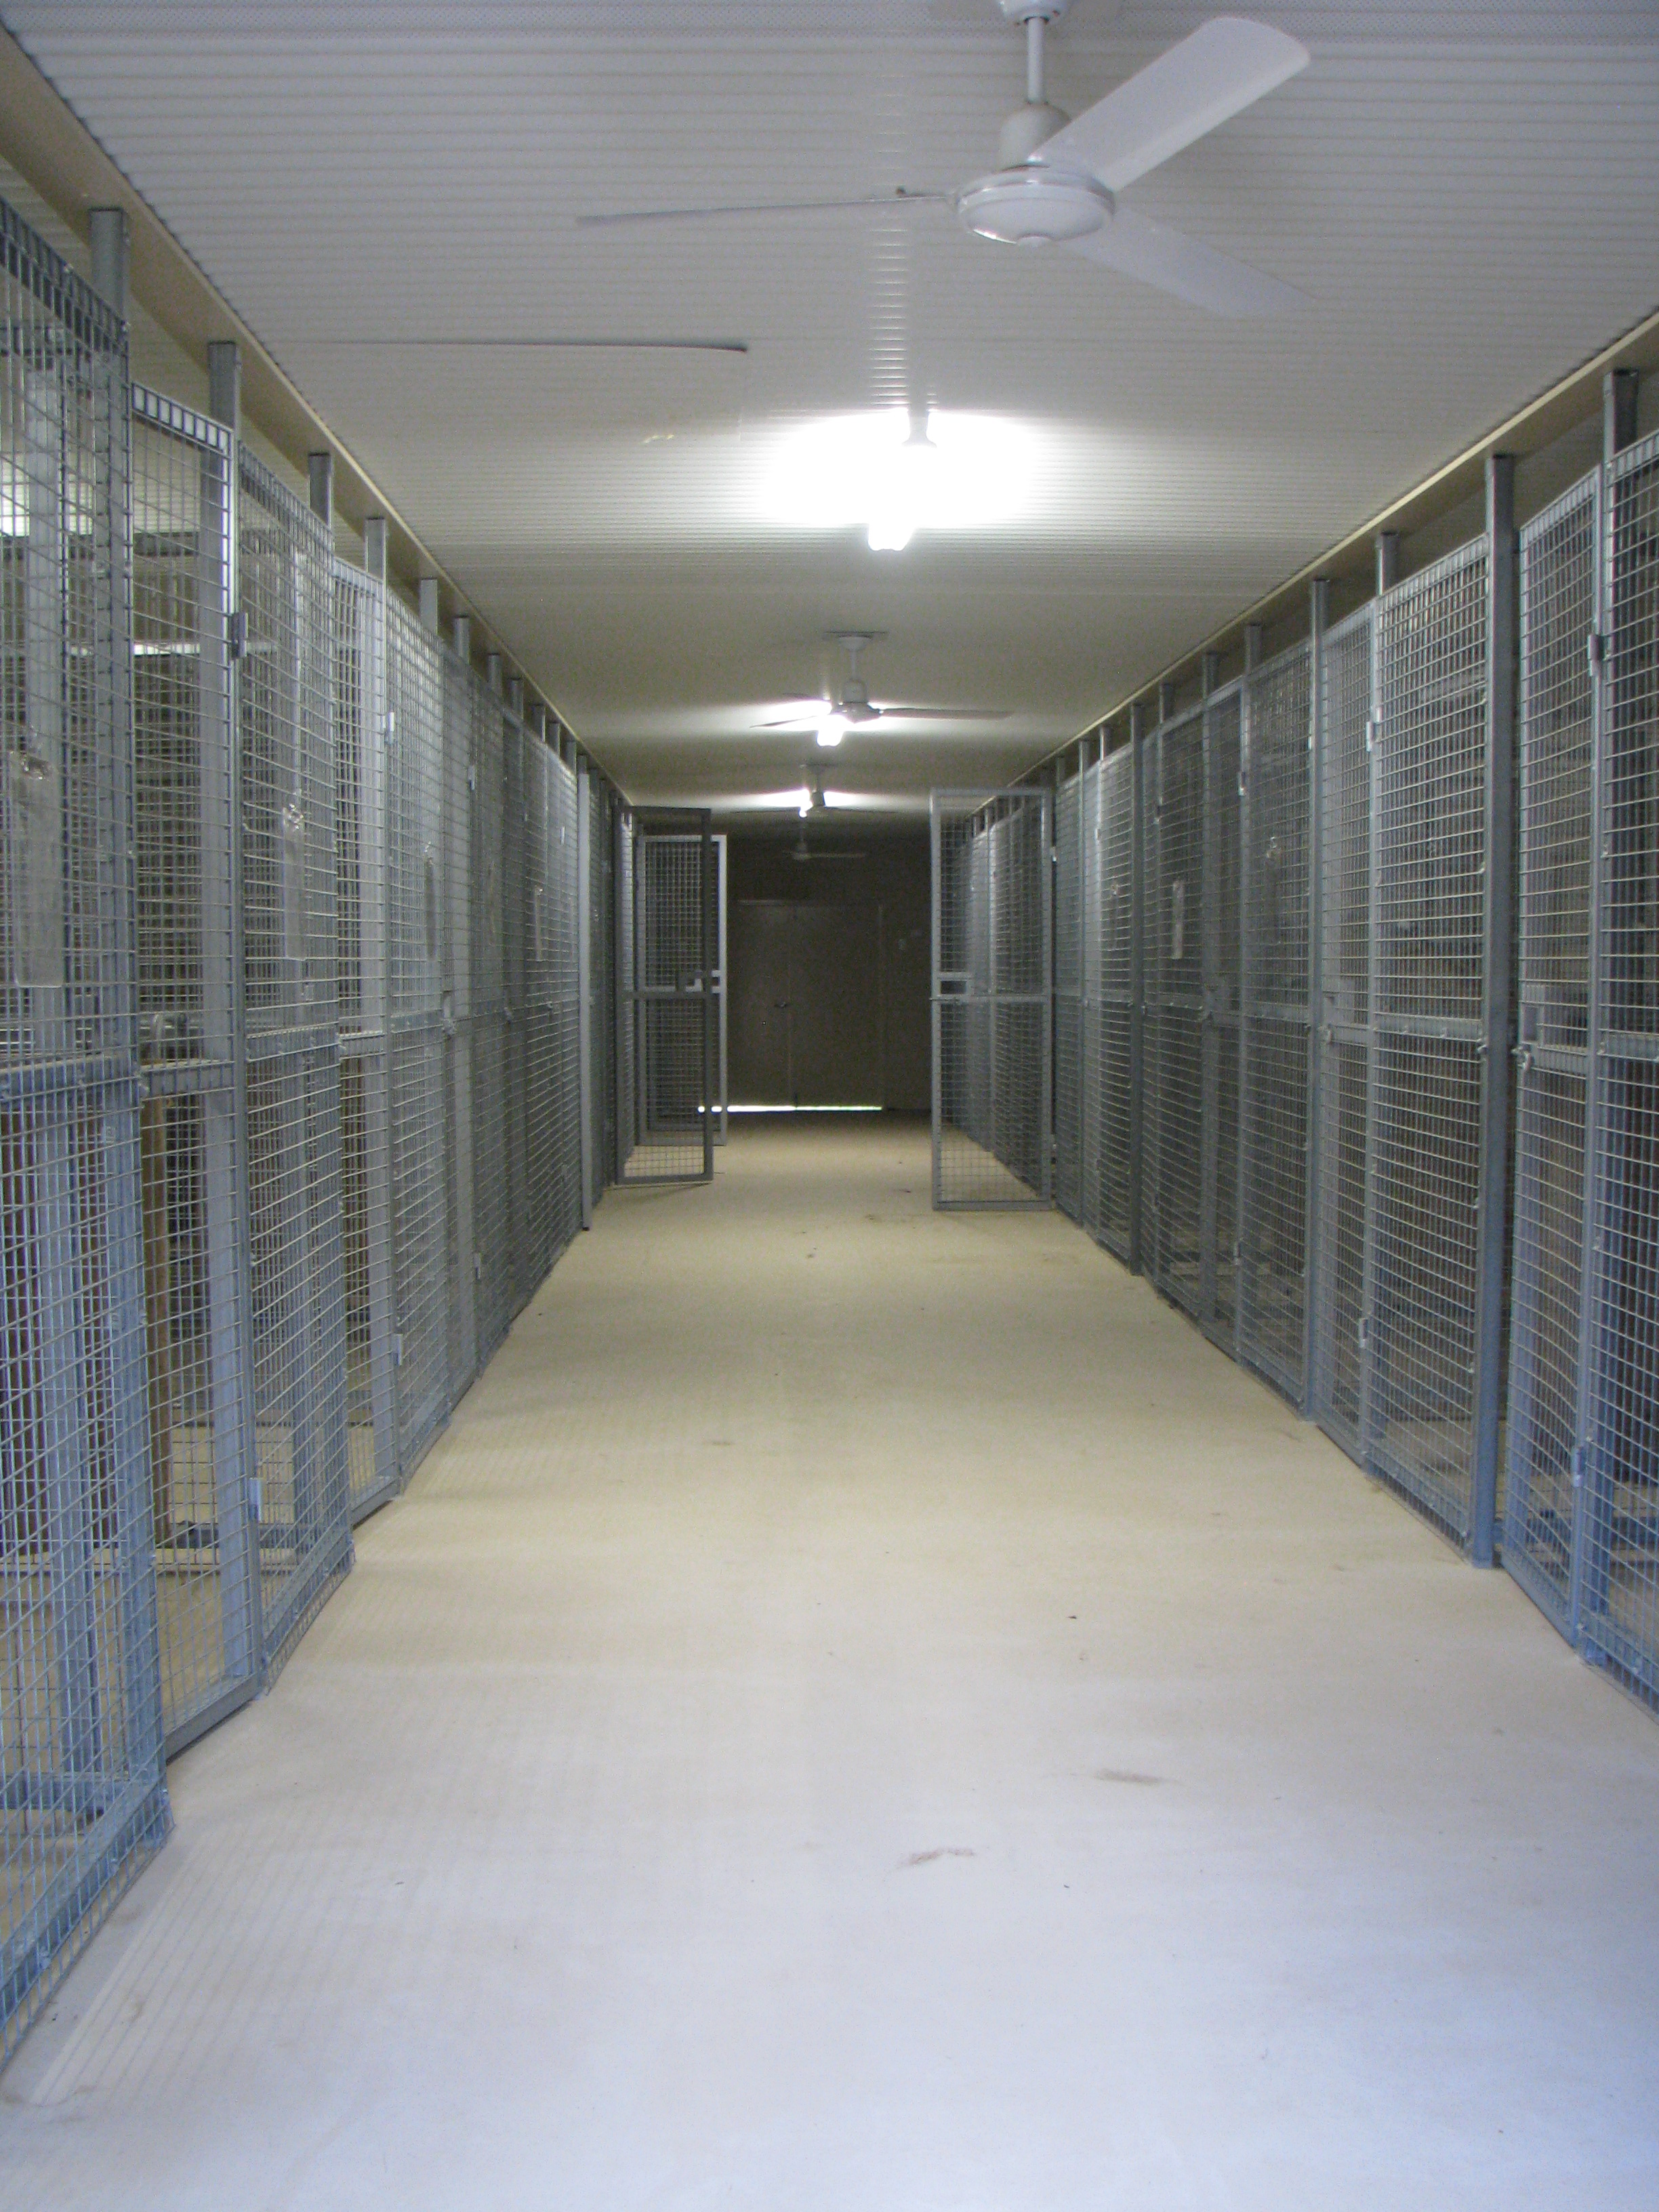 Our kennels are new and triple insulated cool in summer warm in winter